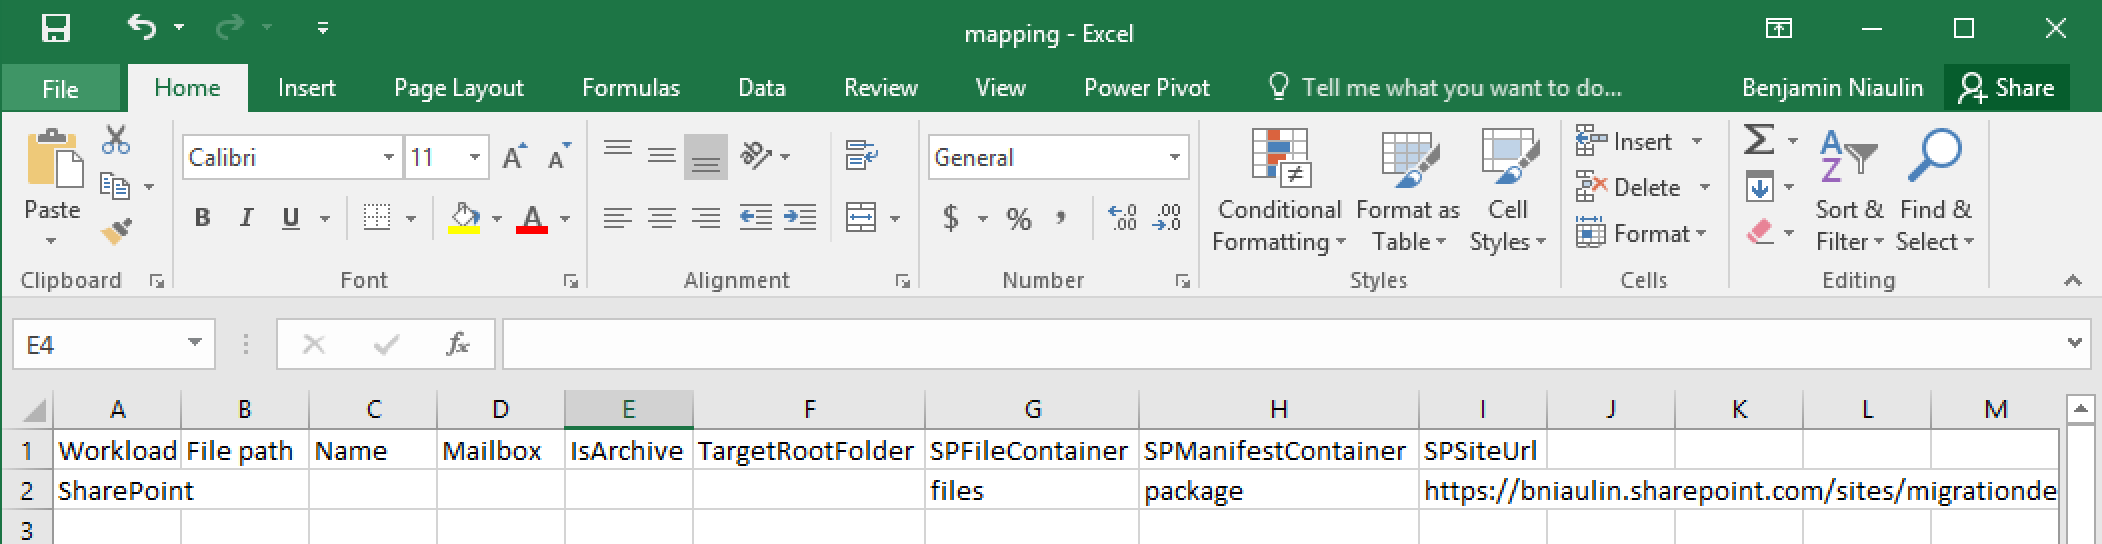 Office 365 Import create mappings